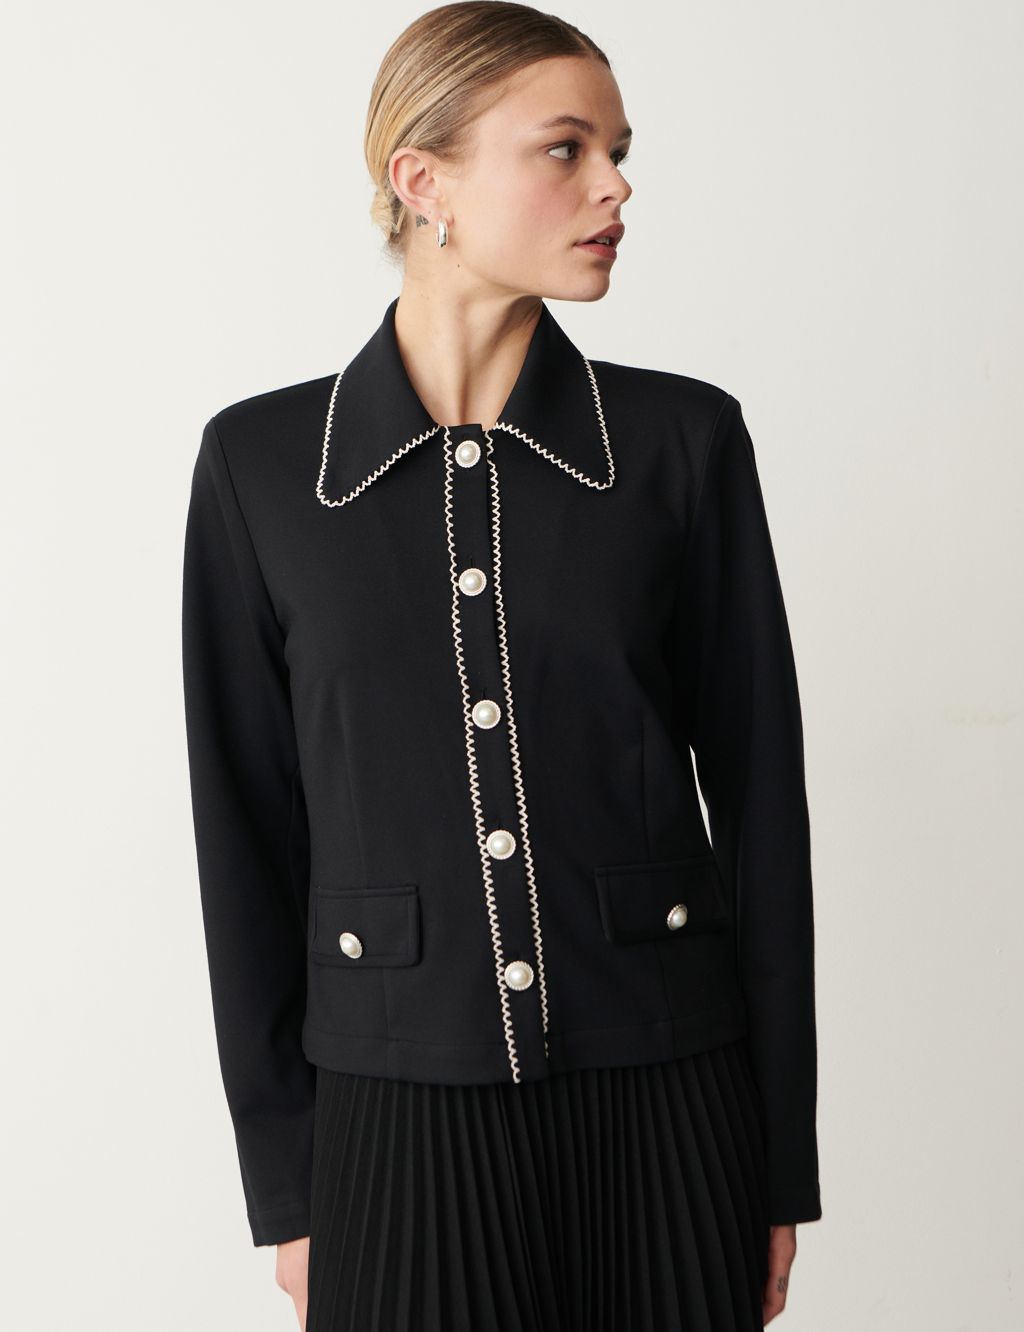 Collared Short Jacket | Finery London | M&S